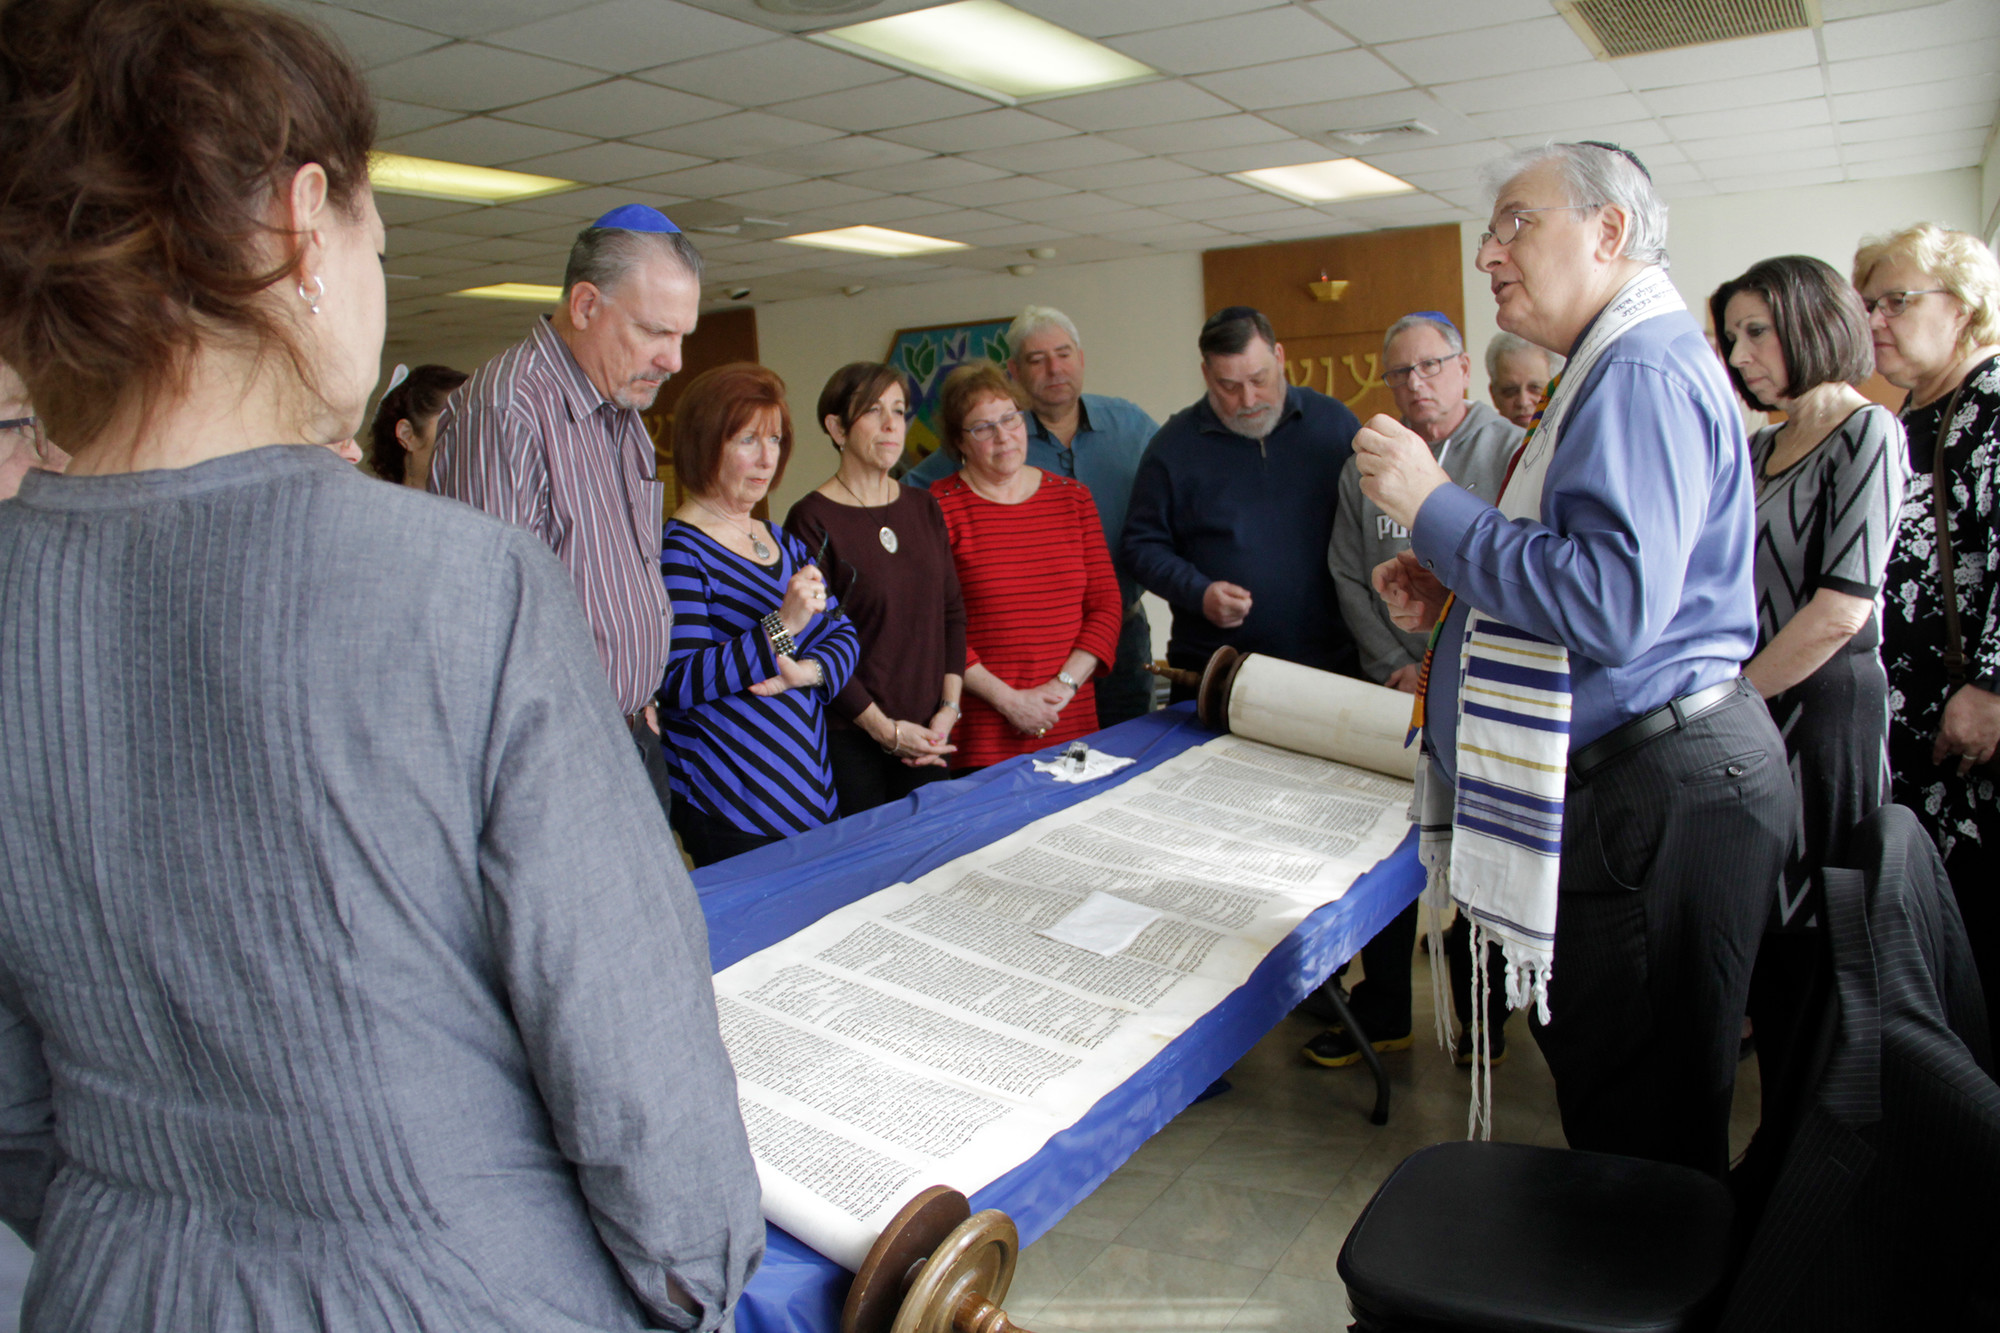 Yurman explained the significance of the Torah scroll to congregants at one of five restoration sessions held last Sunday.